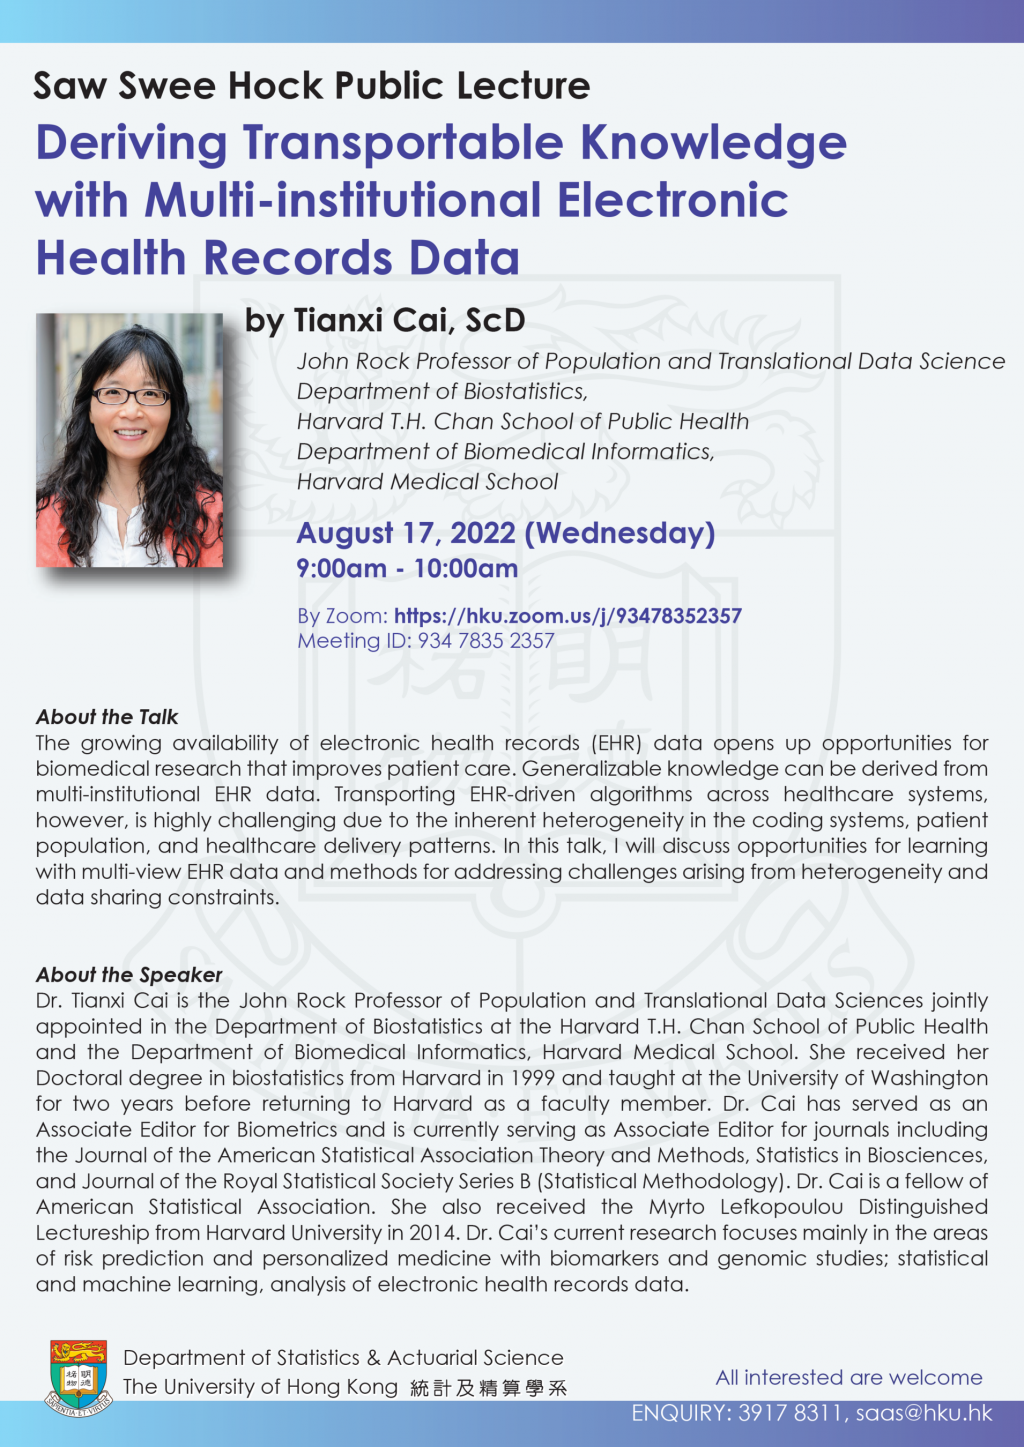 Saw Swee Hock Public Lecture on 'Deriving Transportable Knowledge with Multi-institutional Electronic Health Records Data' by Tianxi CAI,ScD